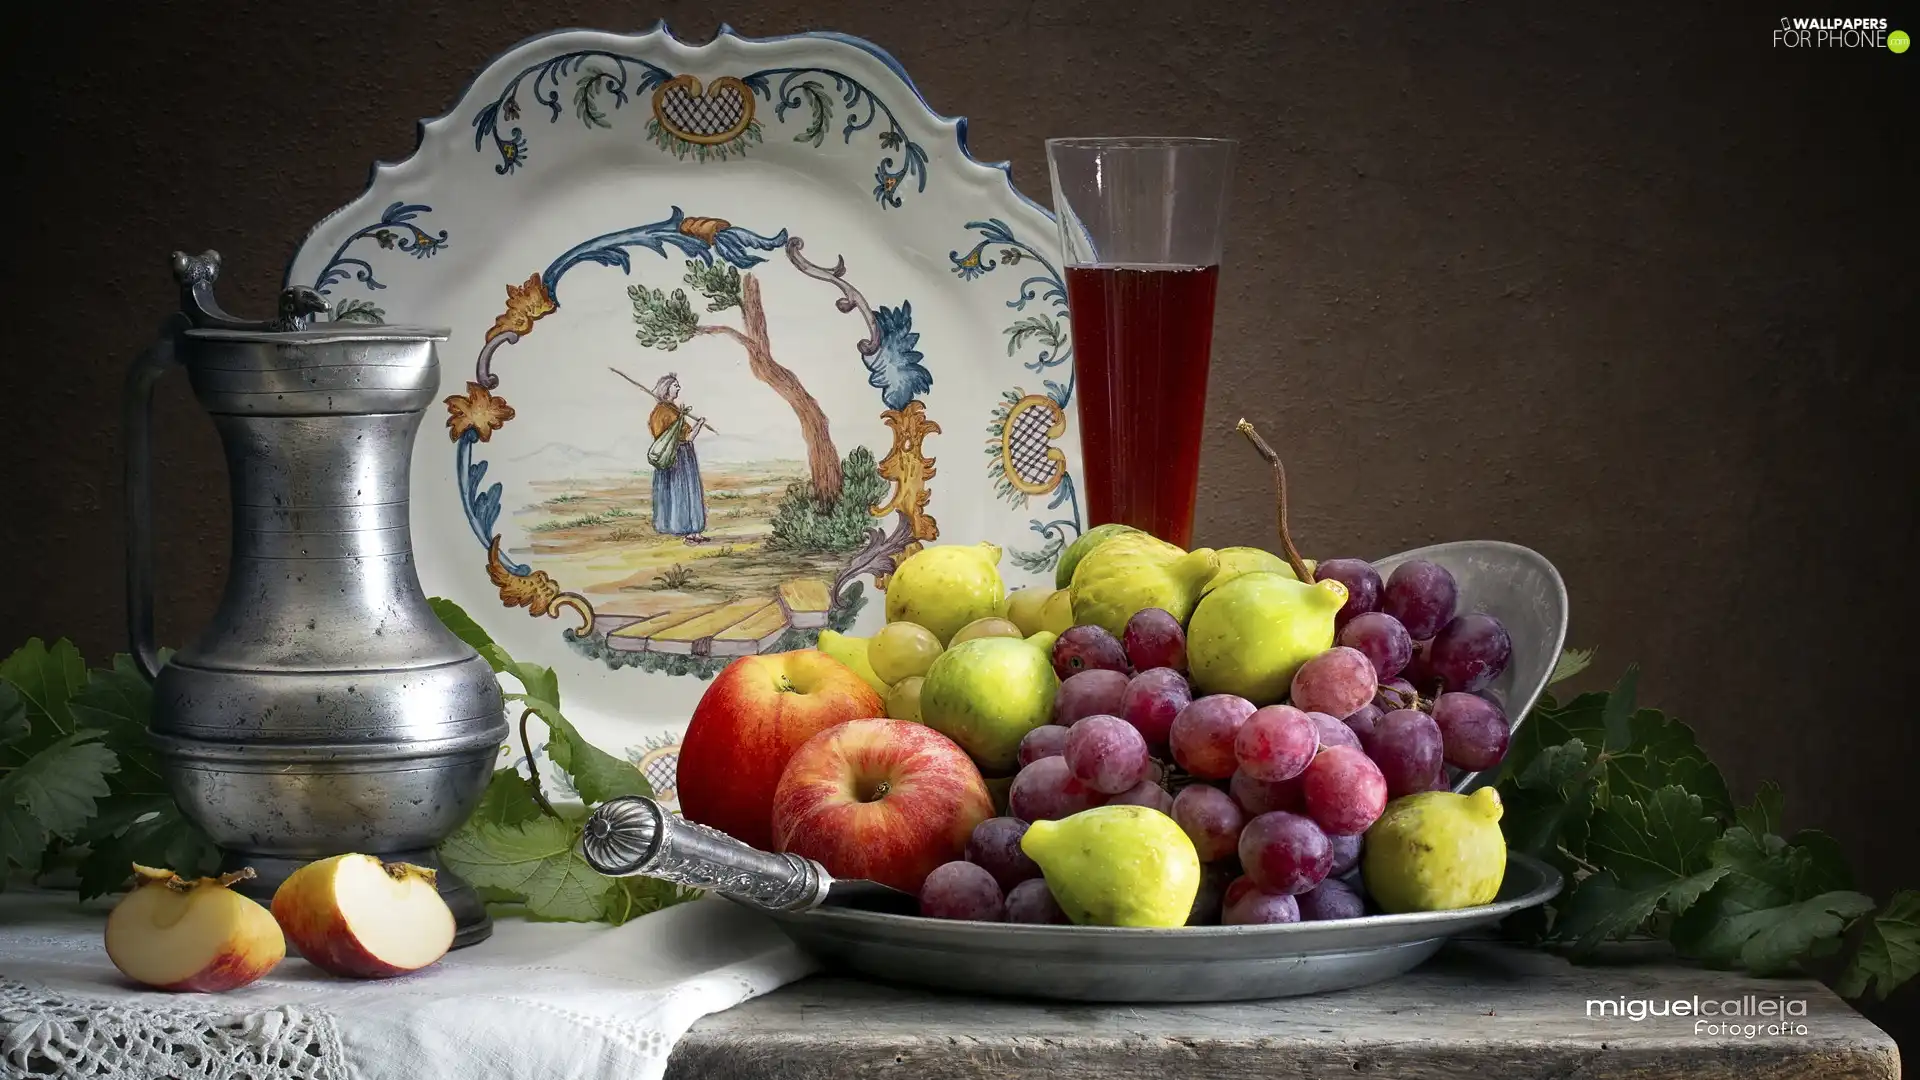 Grapes, Fruits, decorated, apples, composition, jug, plate